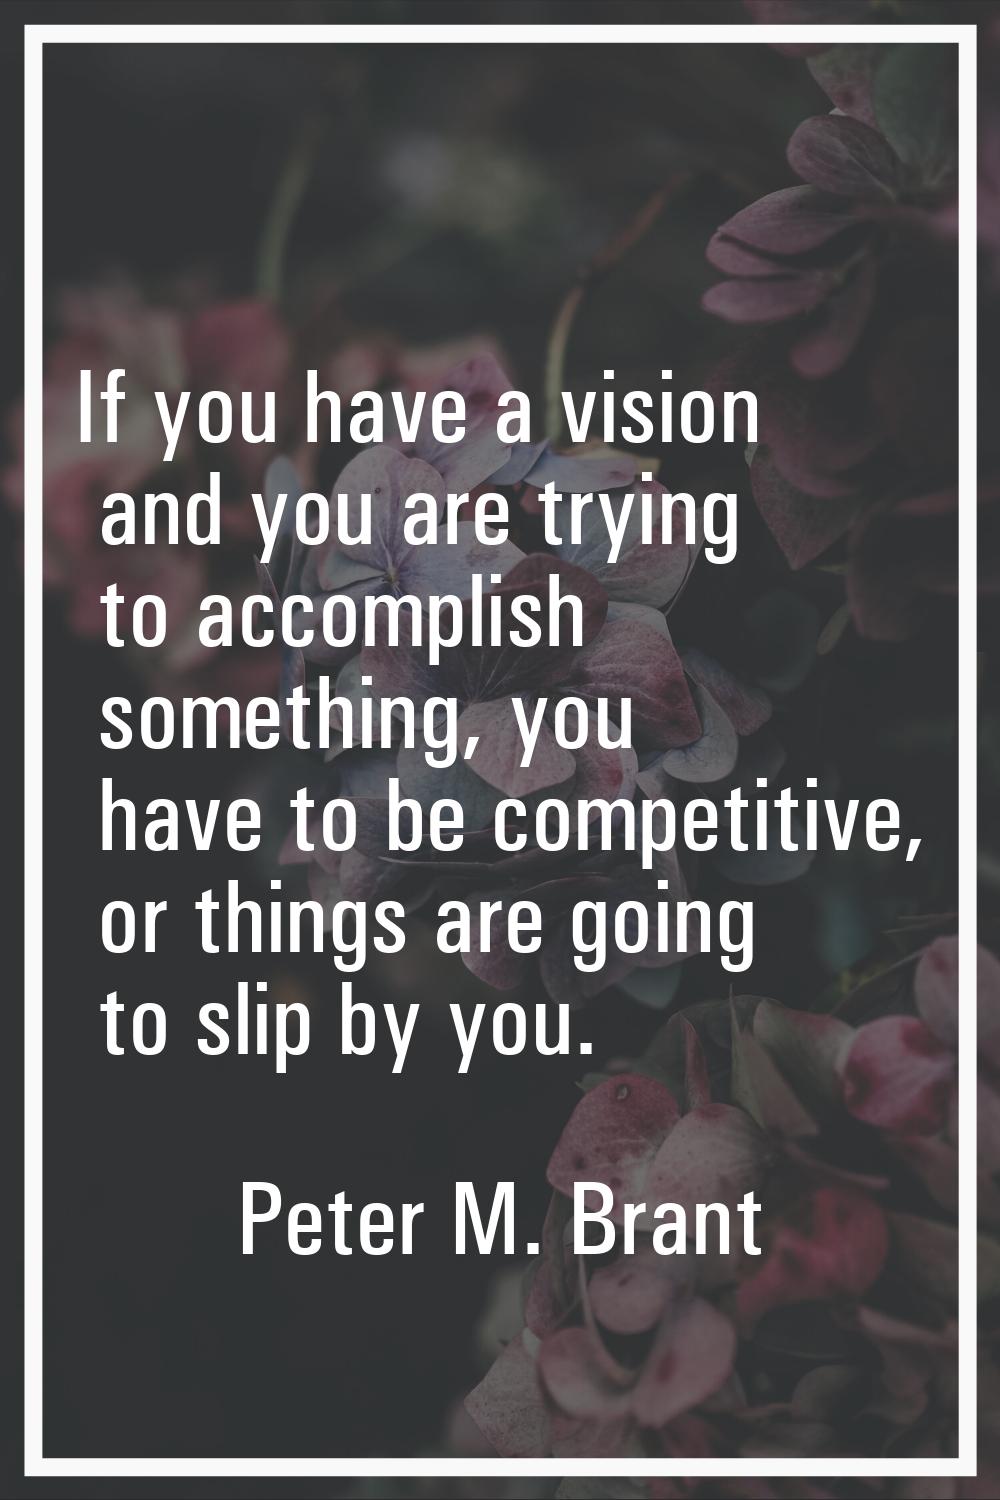 If you have a vision and you are trying to accomplish something, you have to be competitive, or thi